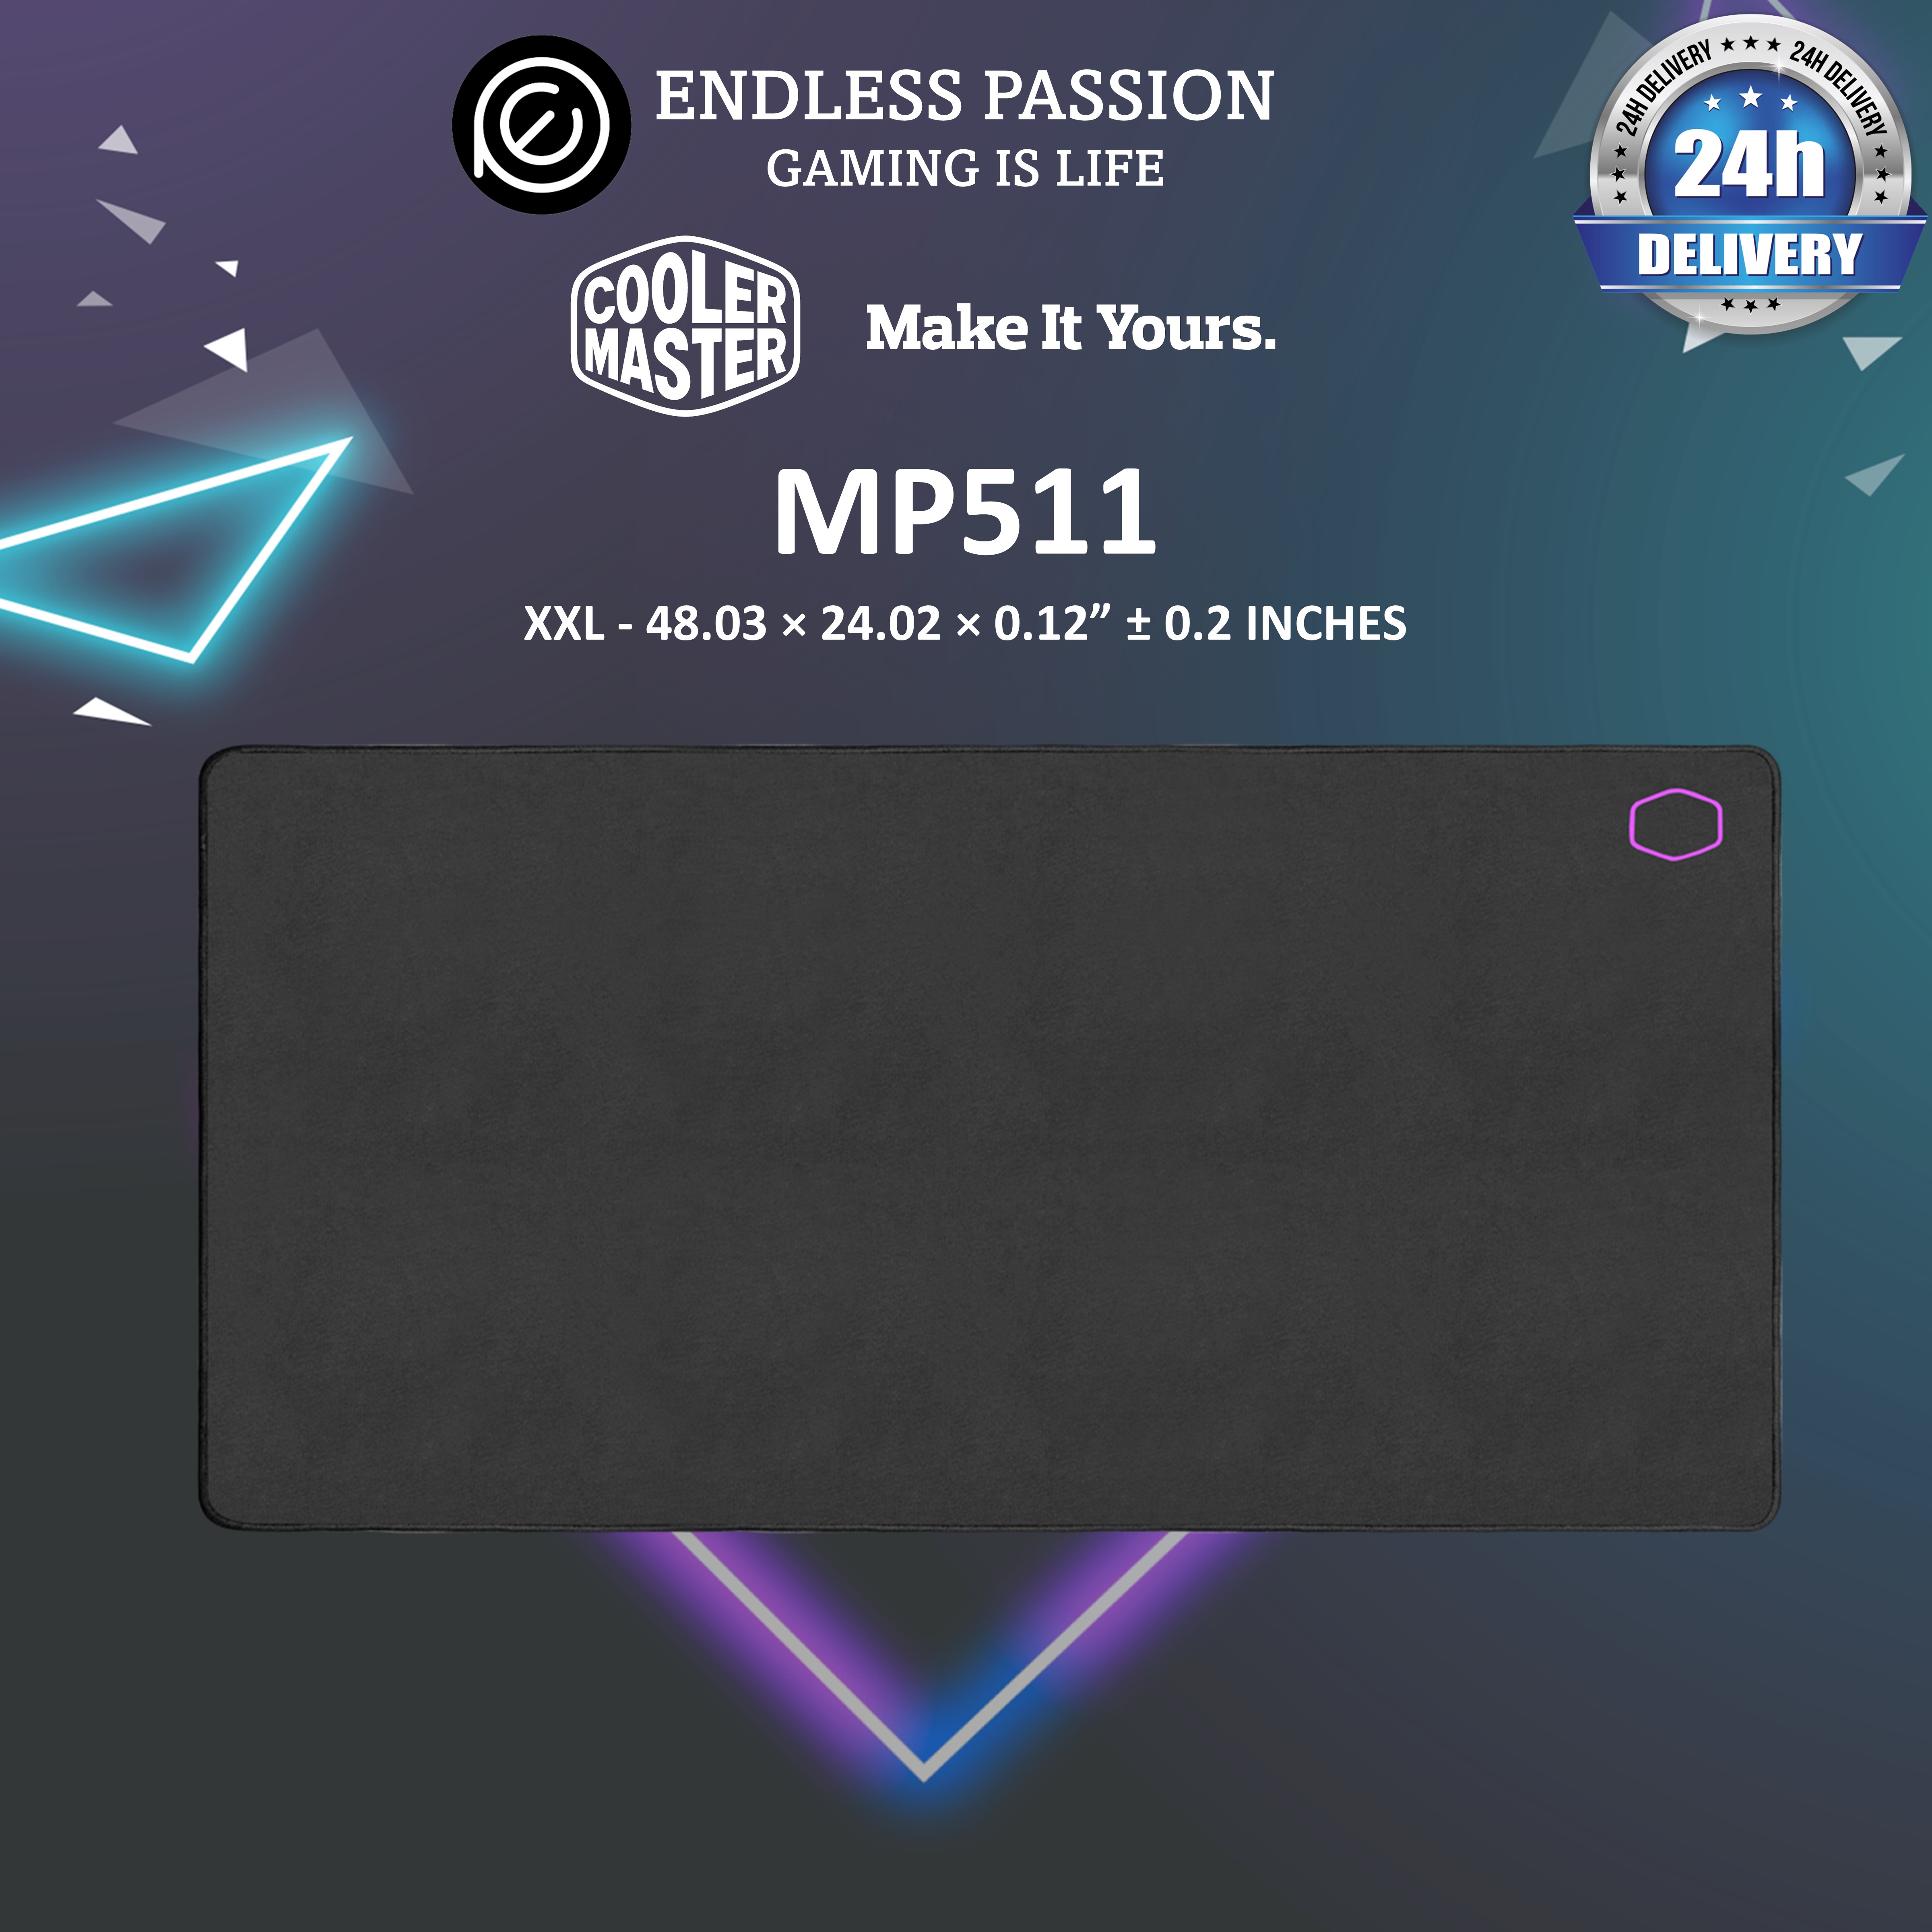 Cooler Master MP511 XL Gaming Mouse Pad with Splash-Resistant and Durable Cordura Fabric 